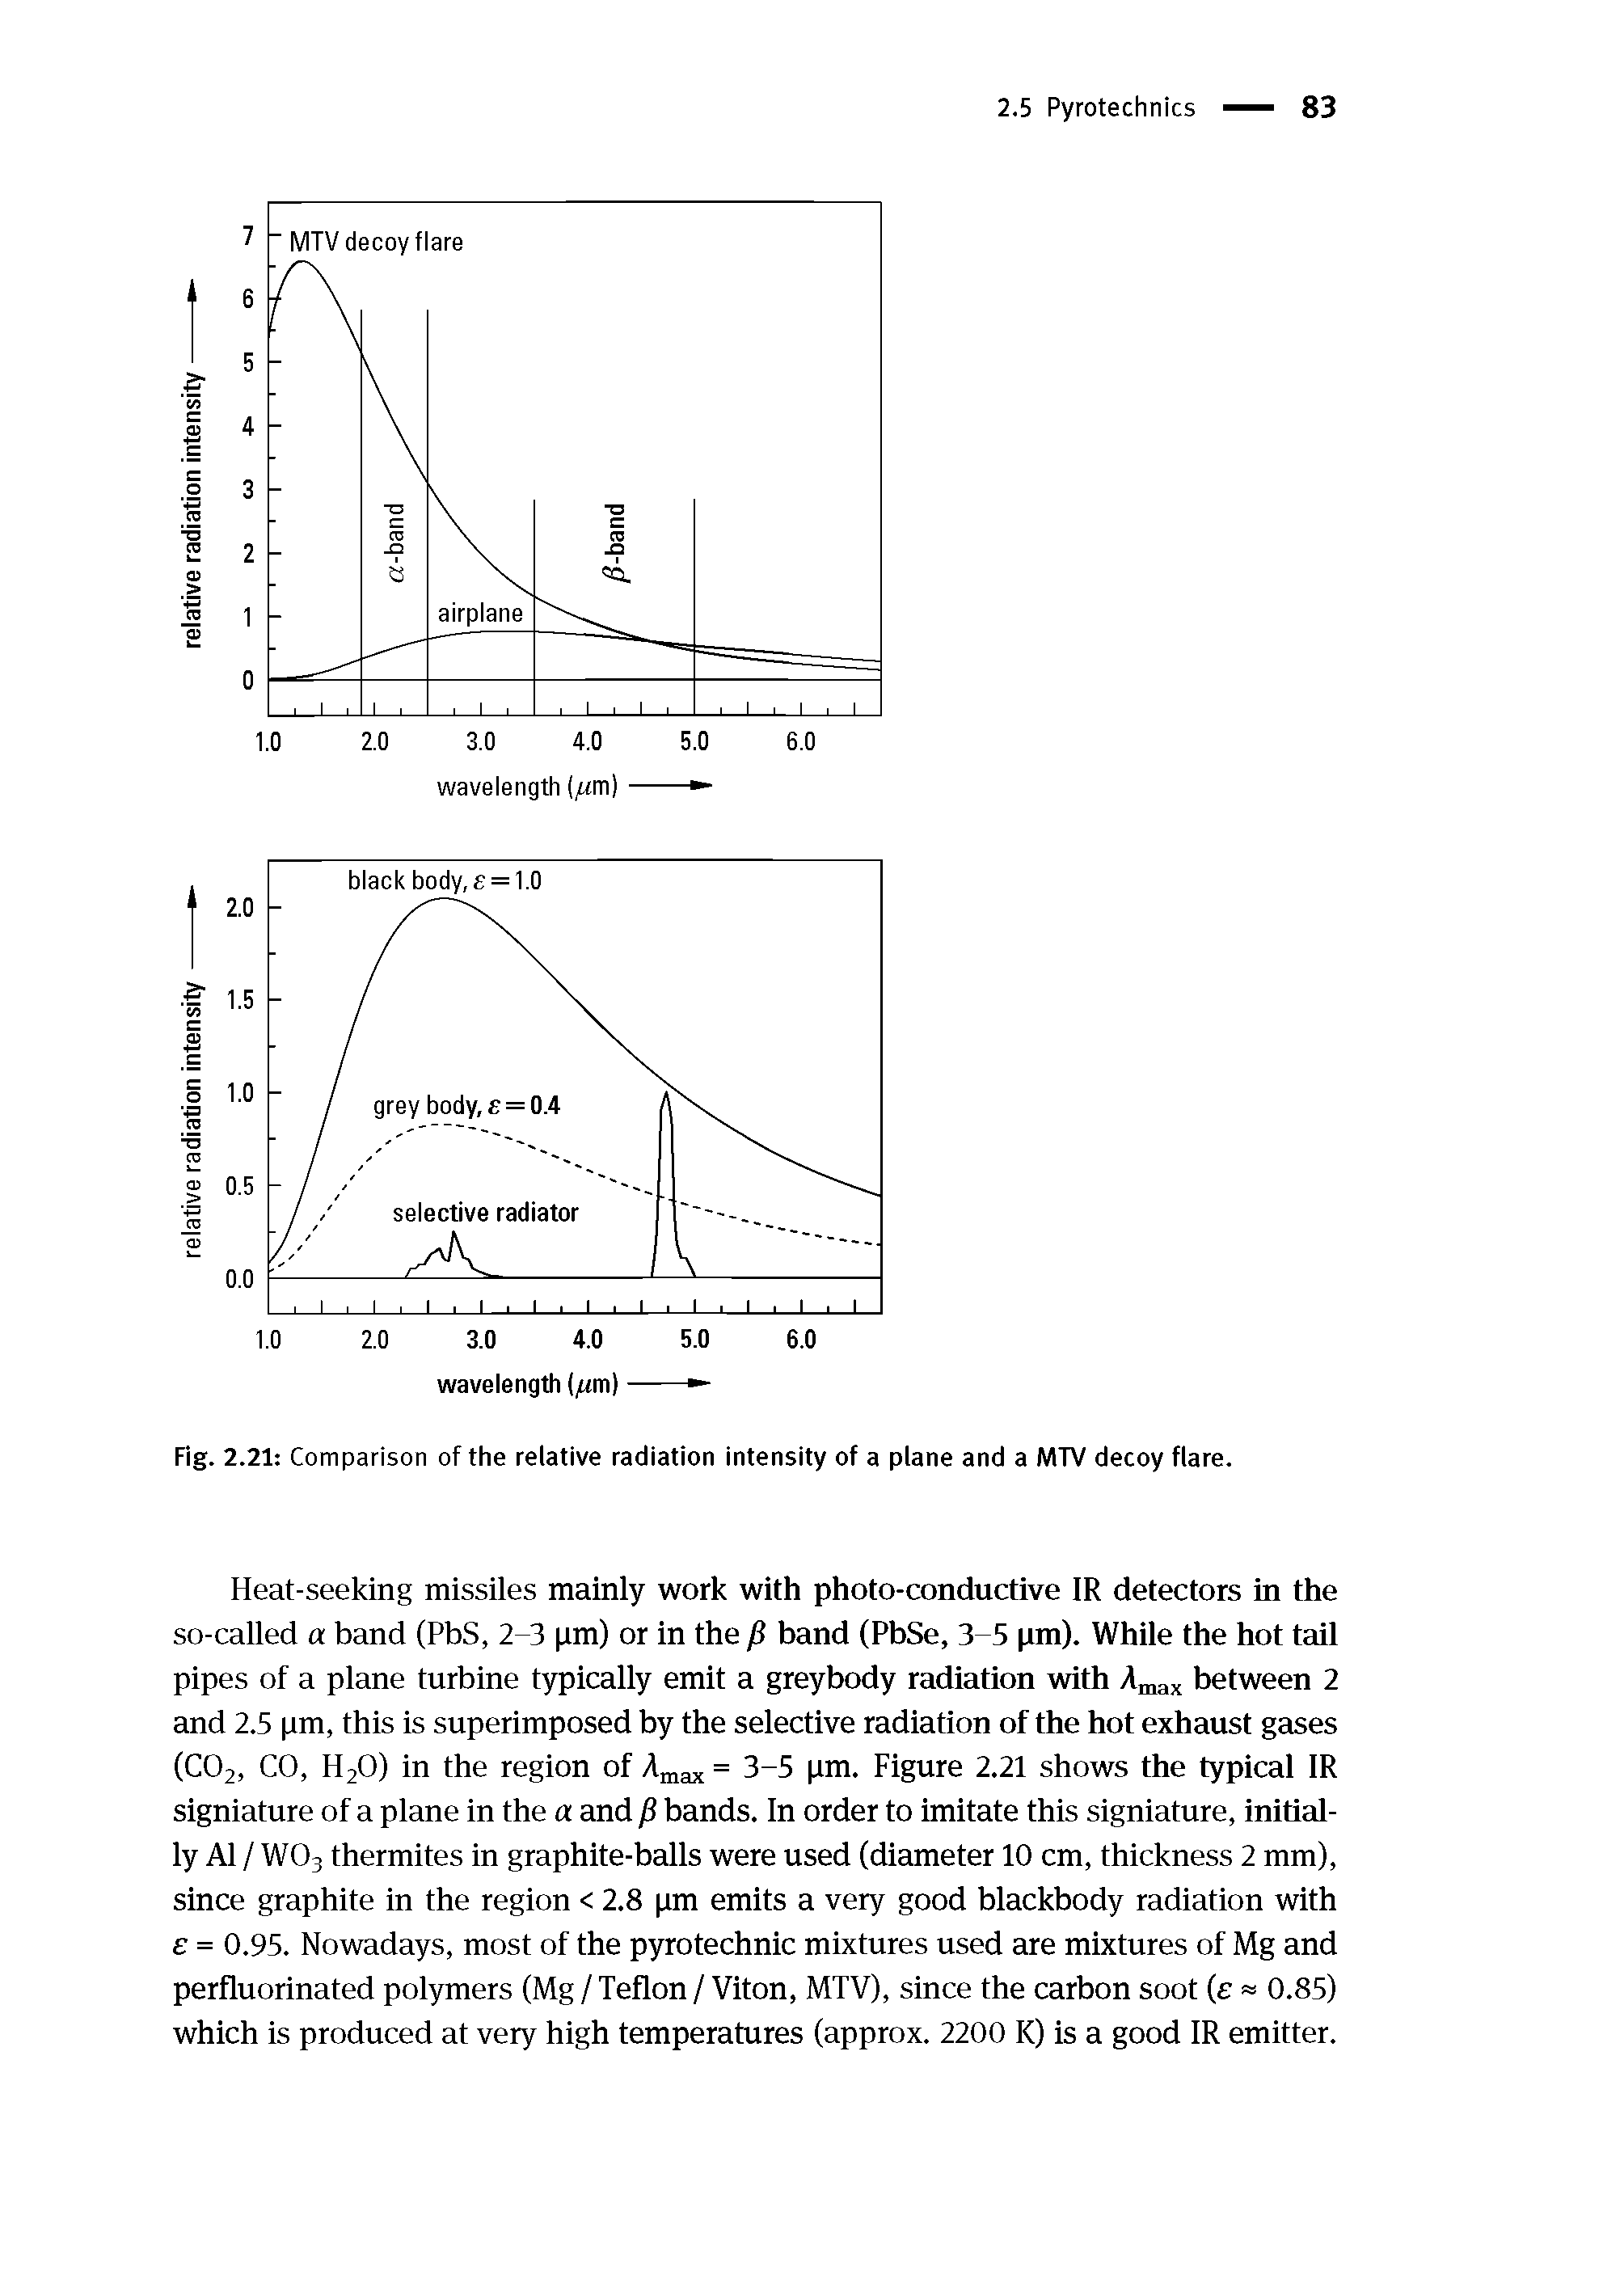 Fig. 2.21 Comparison of the relative radiation intensity of a plane and a MTV decoy flare.